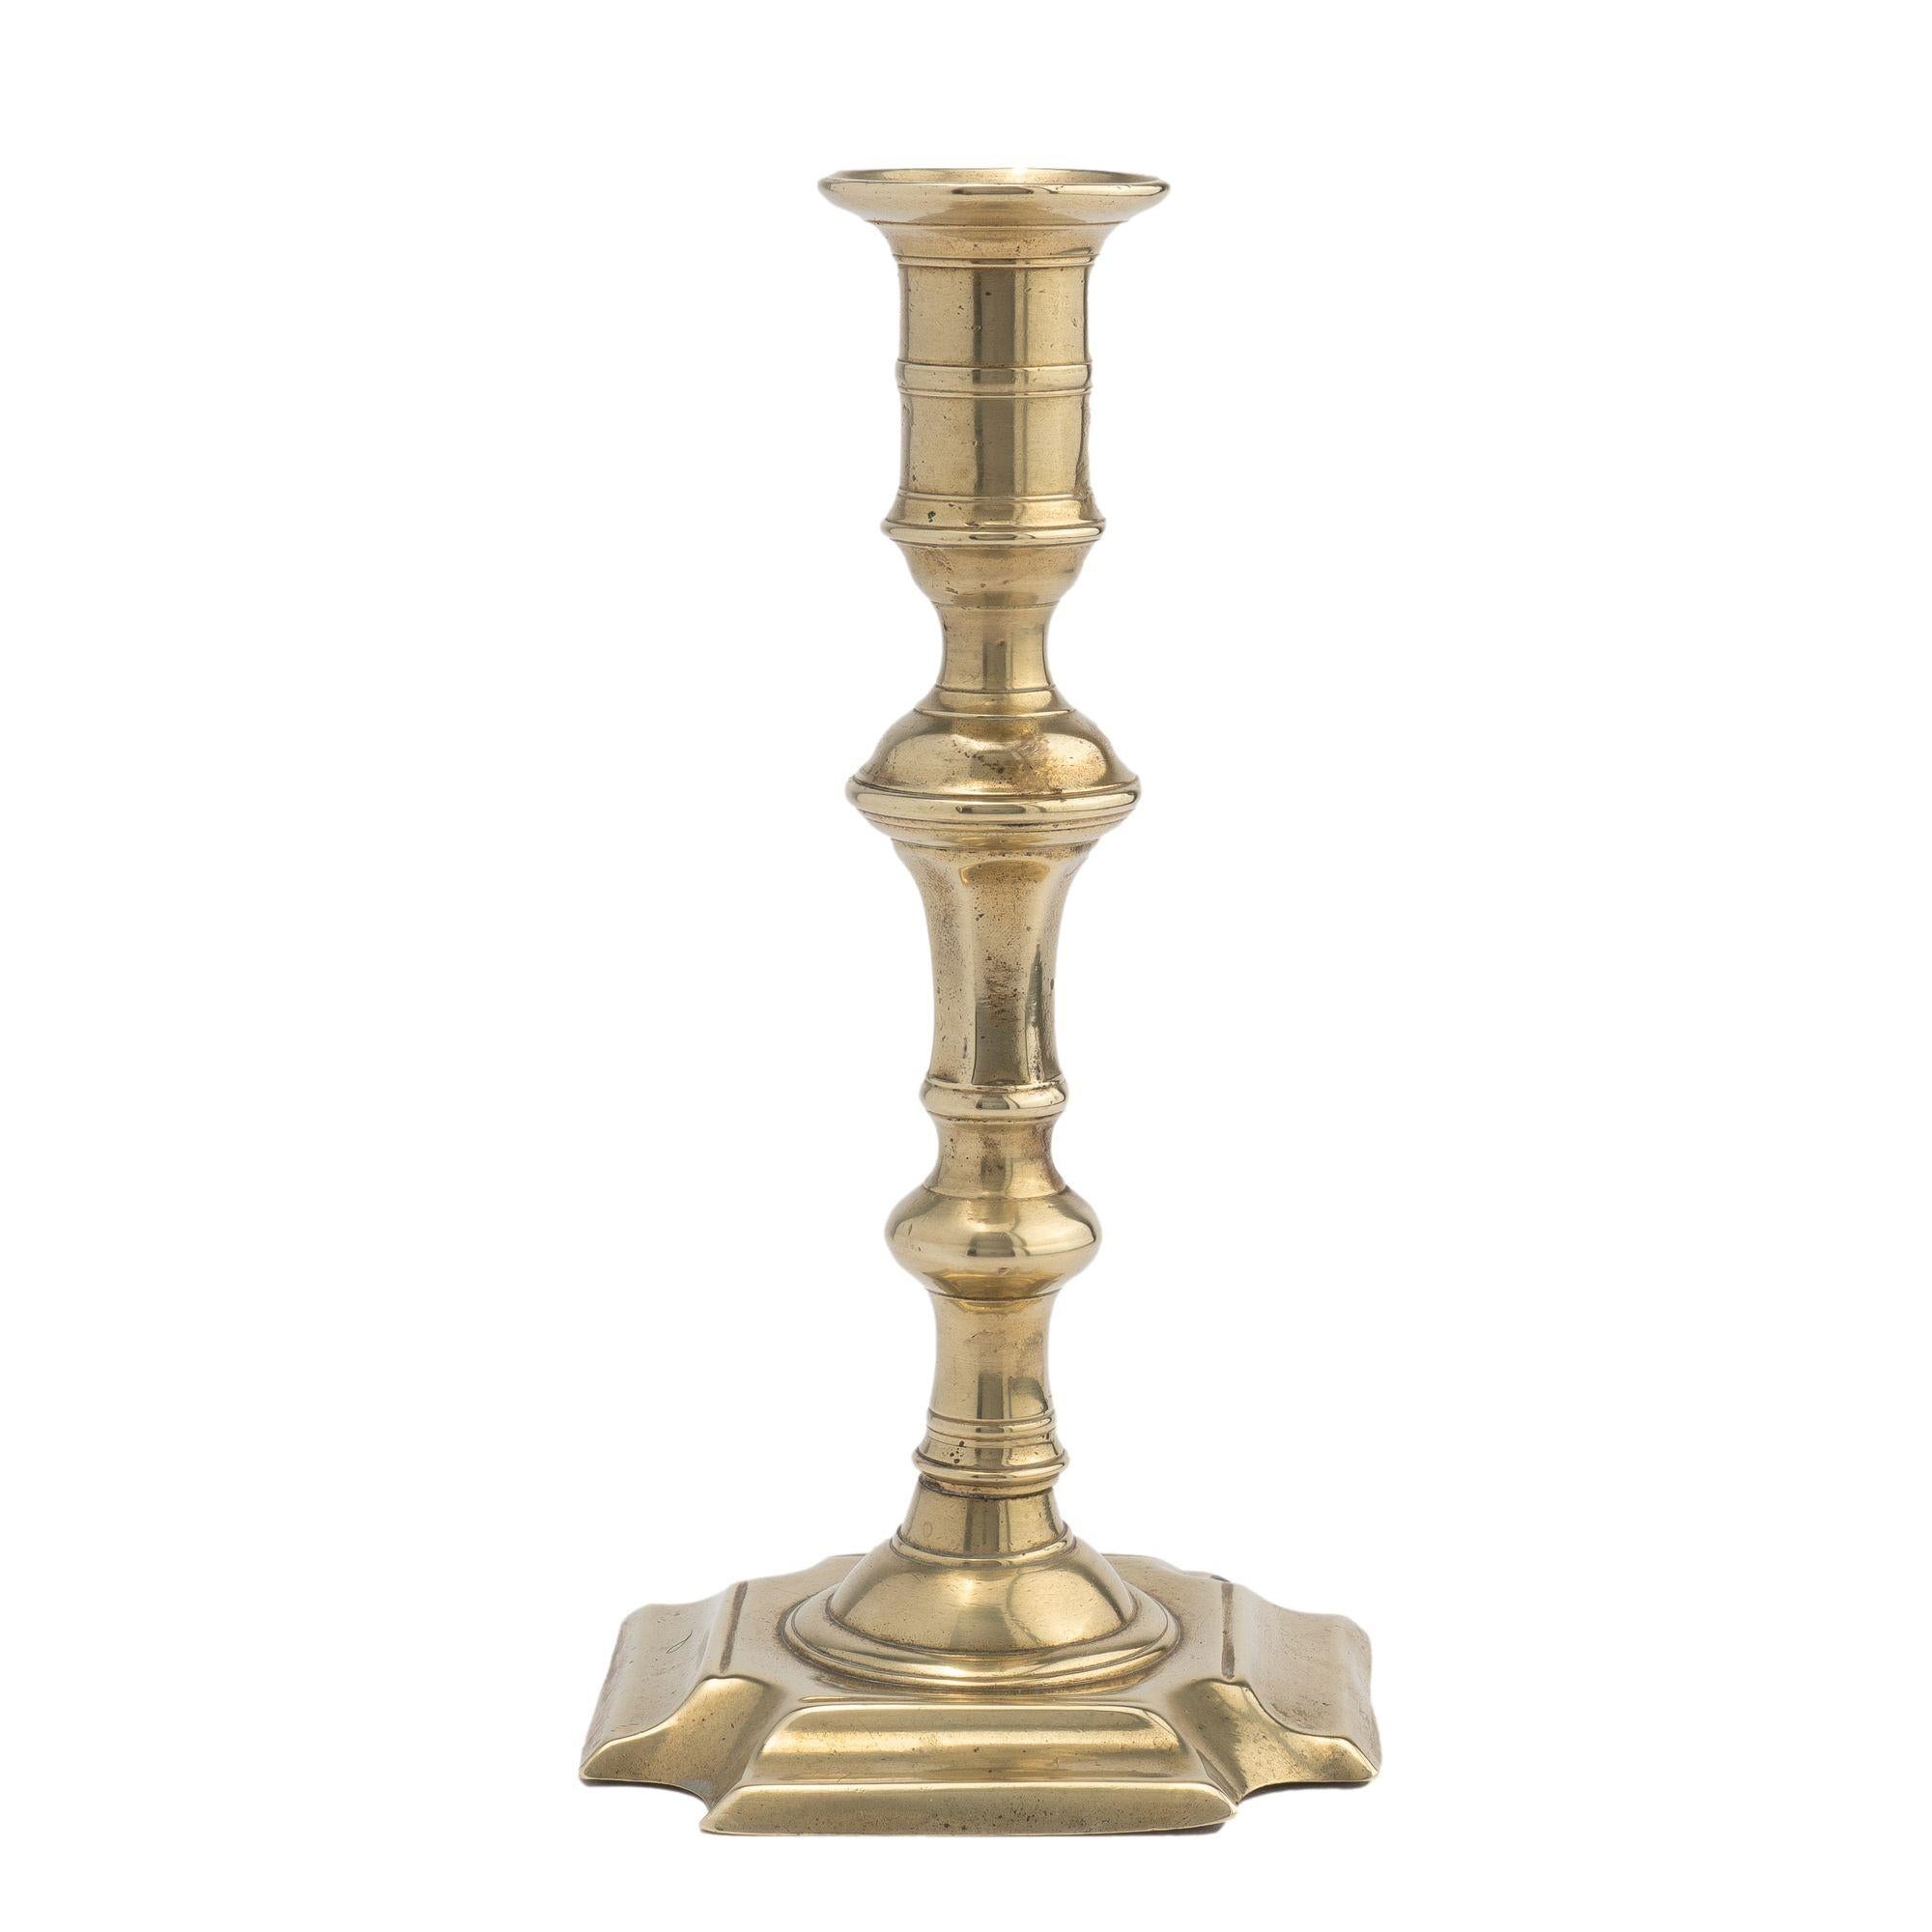 Queen Anne brass candlestick with a hollow core cast baluster. The bluster is cast with a candle cup with medial ring along with a cupped circular bobeshe. The baluster is peened to a circular dome on a raised square base with cove cut